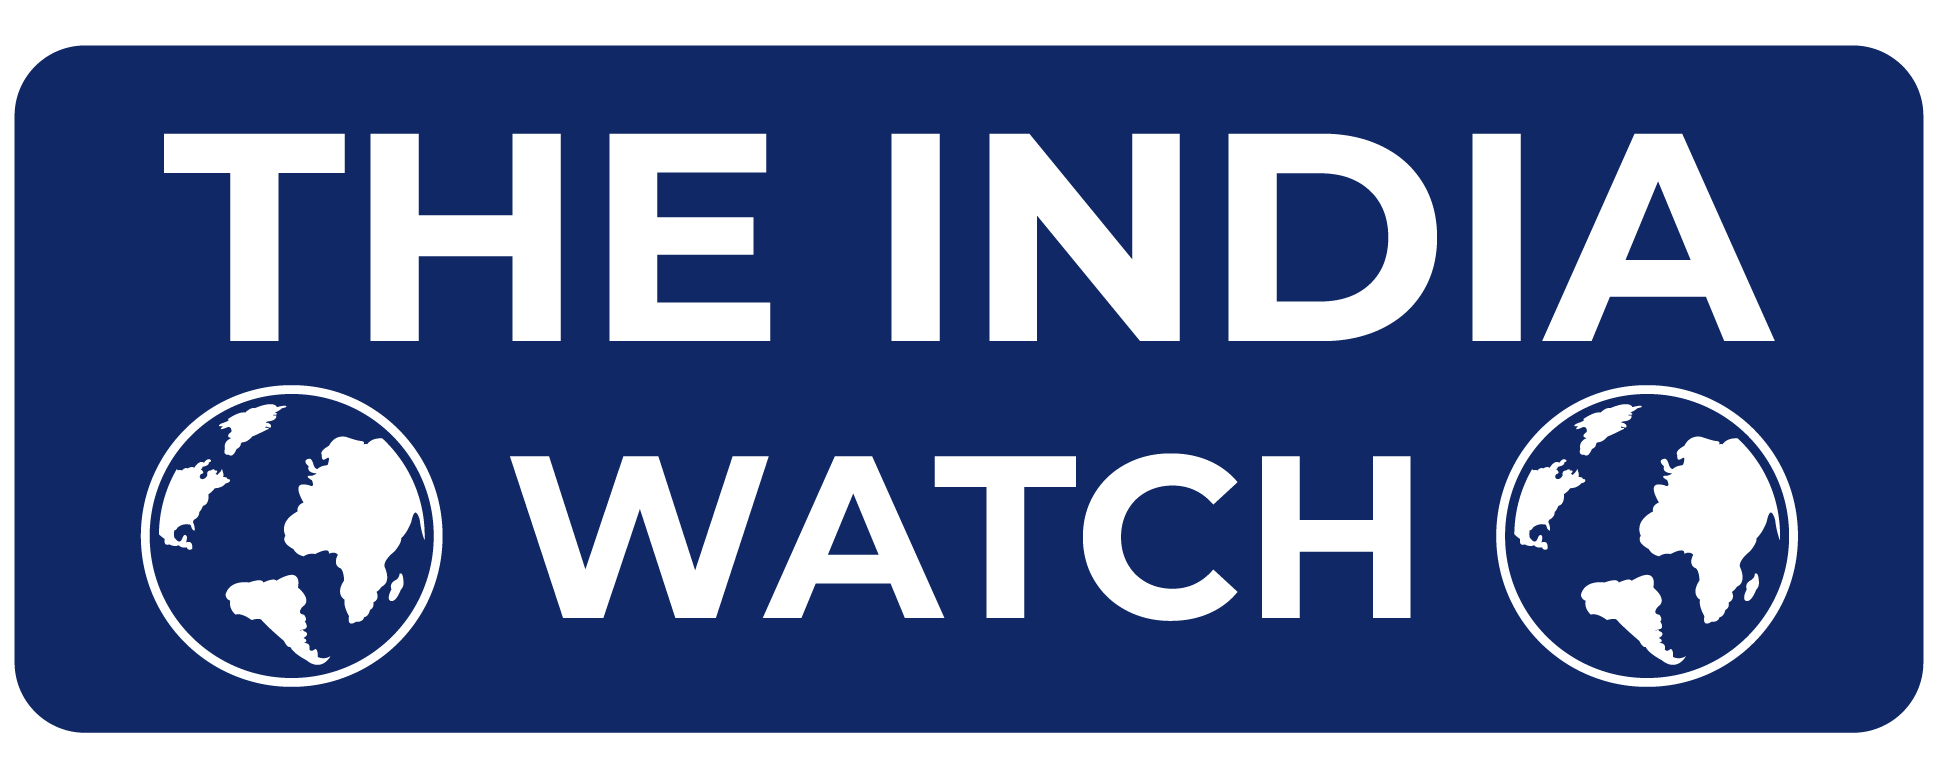 The India Watch